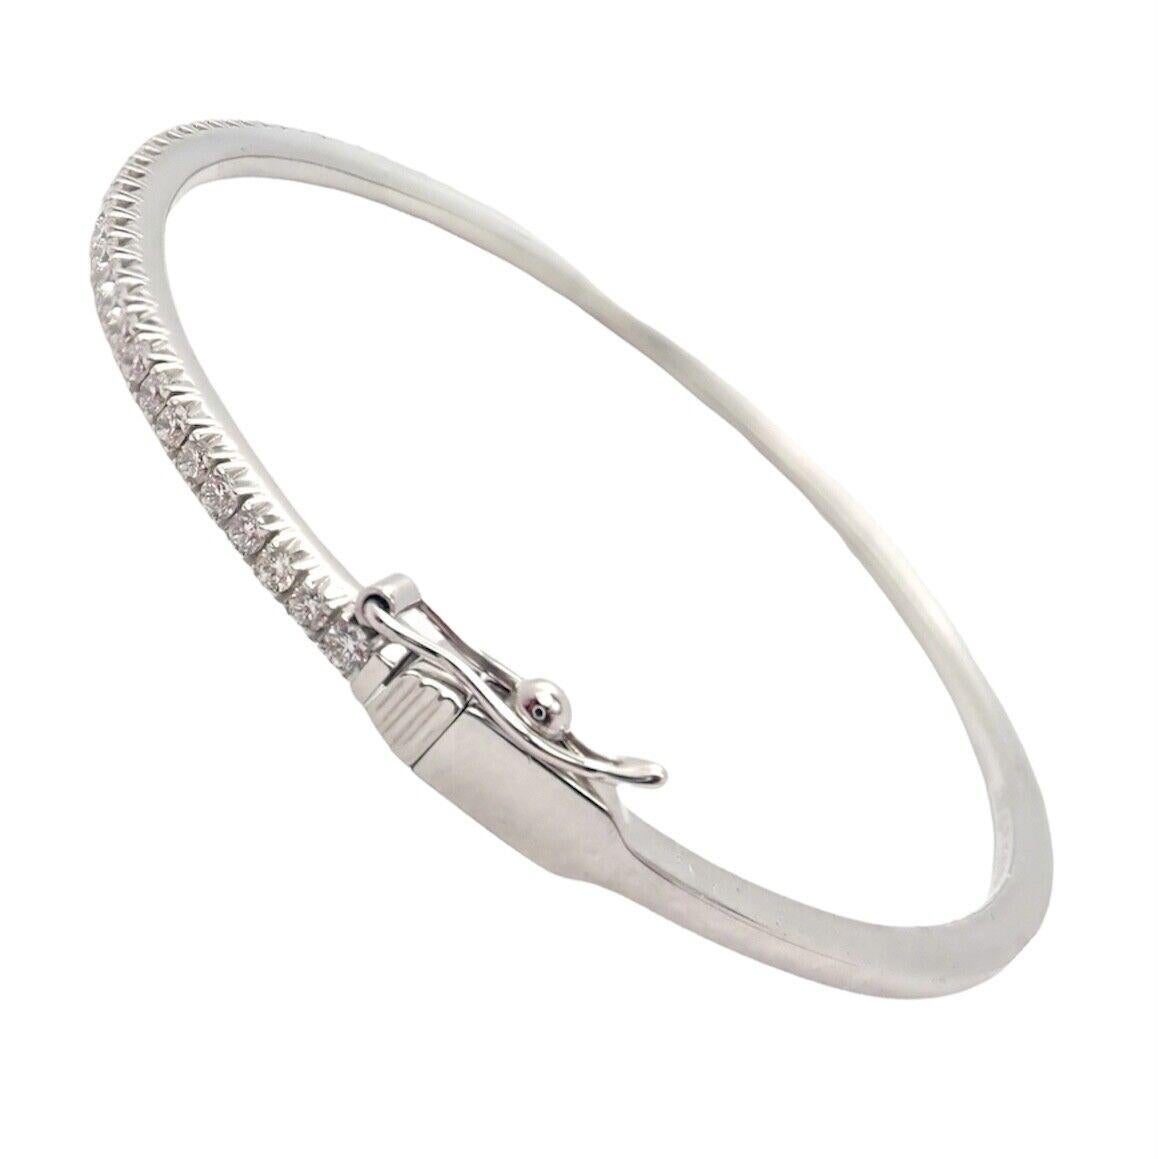 18k White Gold Diamond Hinged Metro Bangle Bracelet by Tiffany & Co.
The streamlined sparkle of this design captures cosmopolitan style and energy. Hinged bangle in 18k white gold with a half circle of round brilliant diamonds. Large size, fits